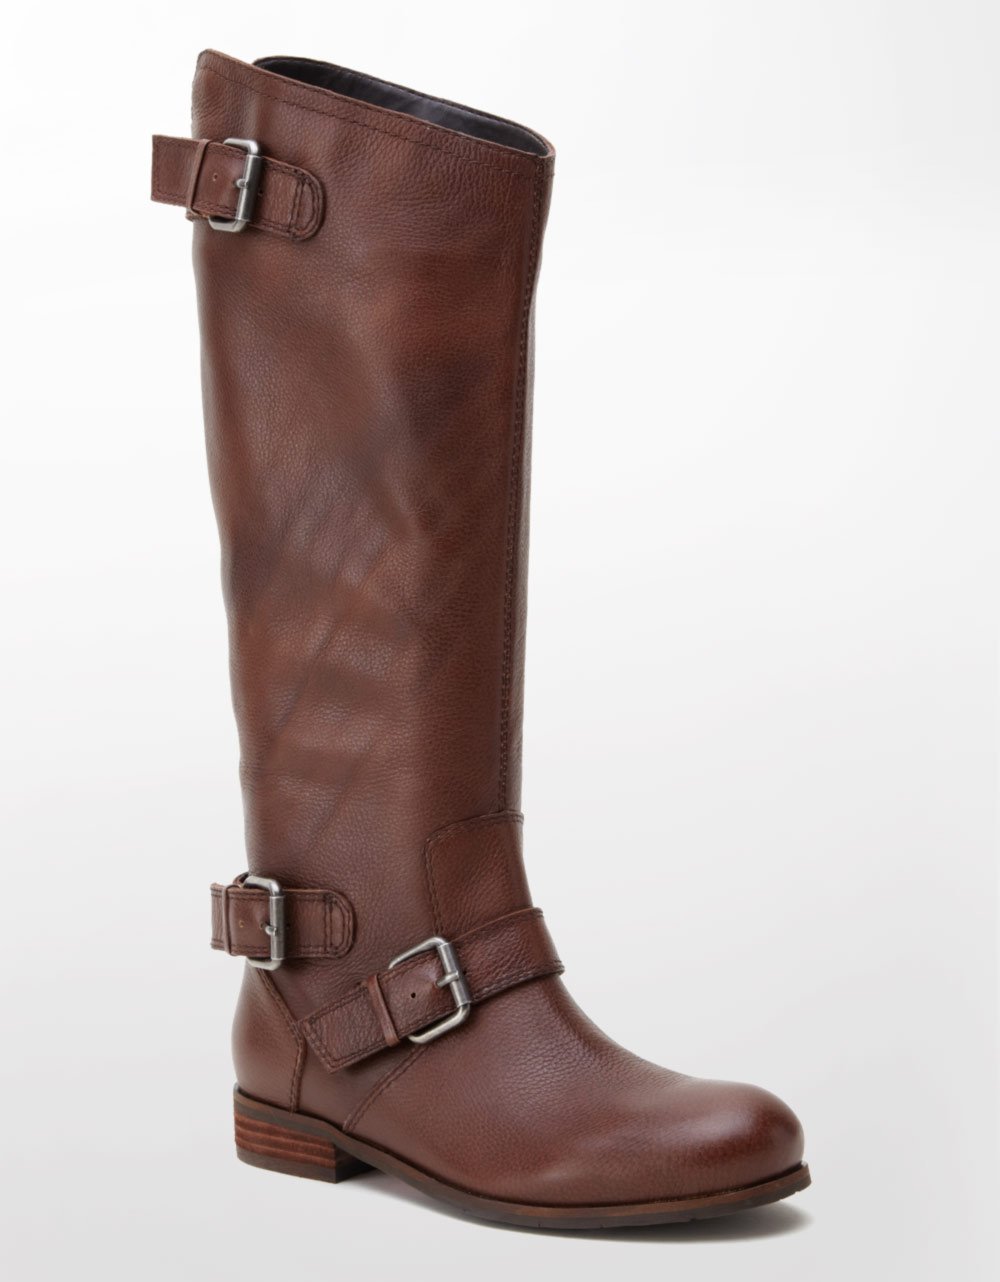 Dv By Dolce Vita Zela Tall Leather Boots in Brown (brown leather) | Lyst